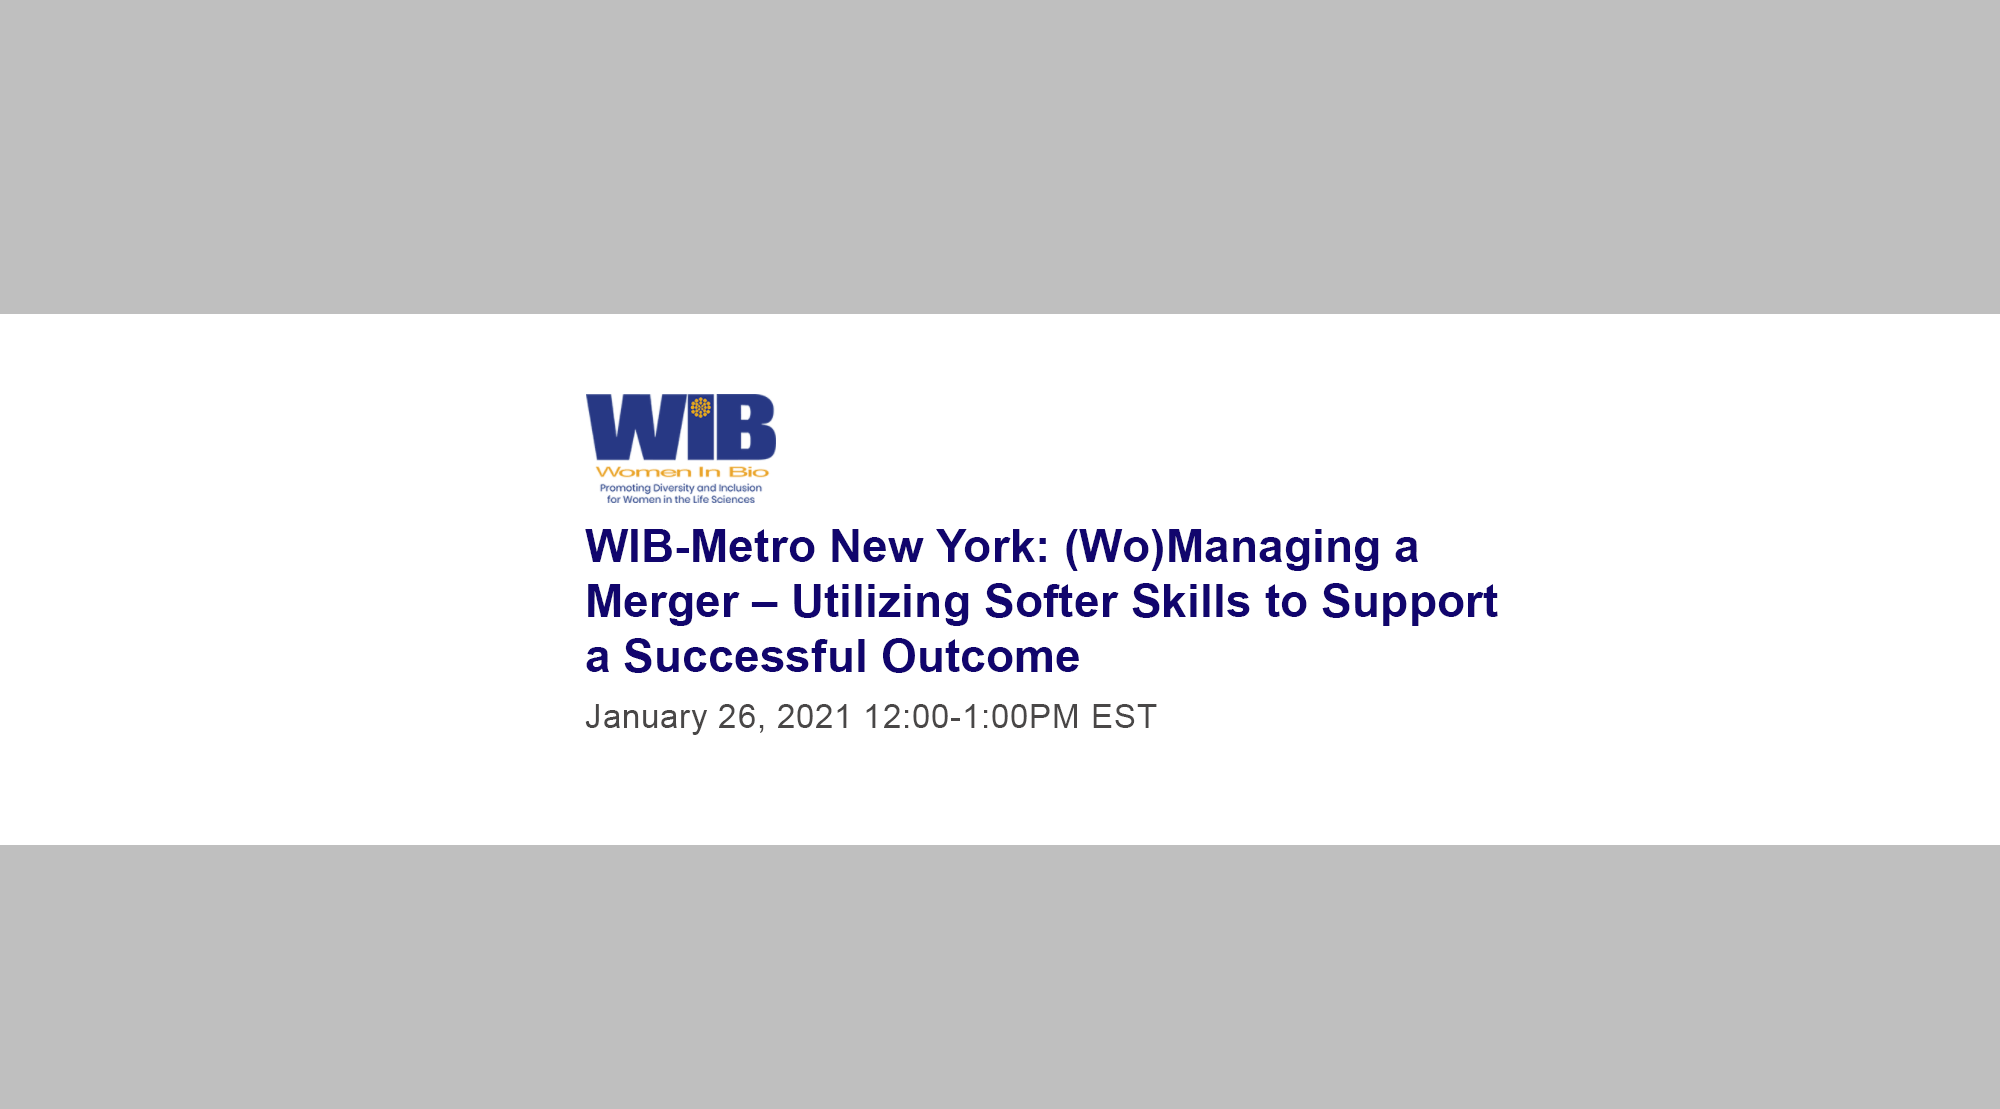 WIB-Metro New York: (Wo)Managing a Merger – Utilizing Softer Skills to Support a Successful Outcome